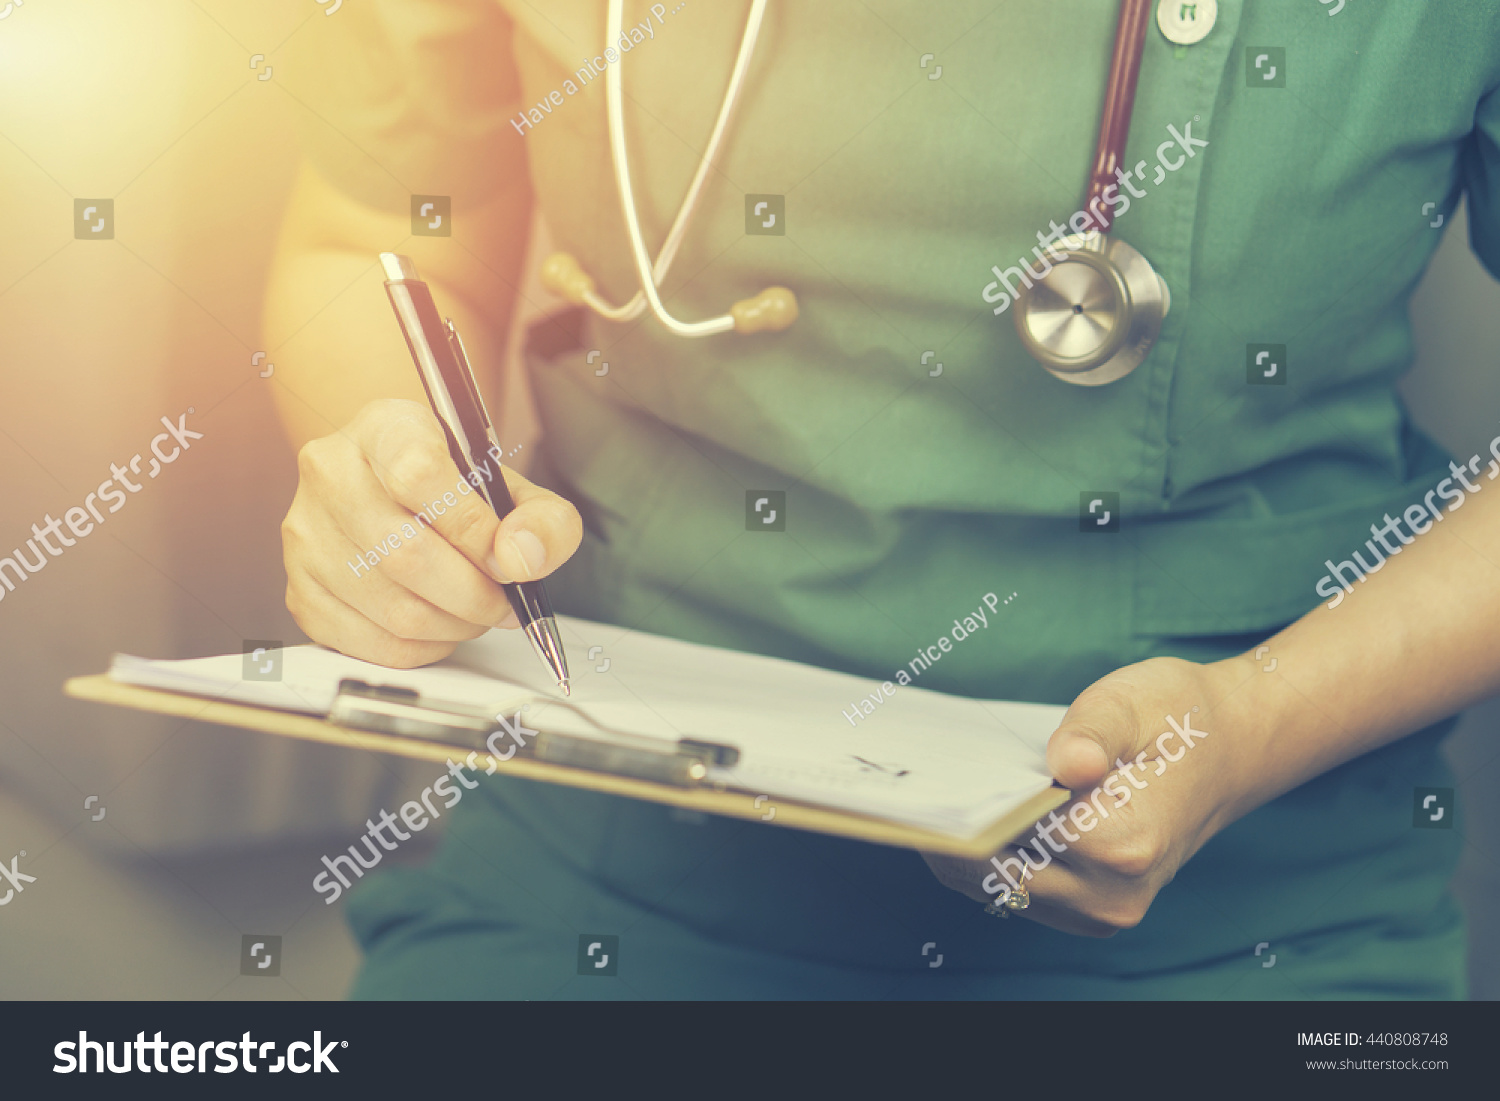  female doctor,surgeon,nurse,pharmacy with stethoscope on hospital holding clipboard,writing a prescription,Medical Exam,Healthcare and medical concept,test results,vintage color,selective focus #440808748